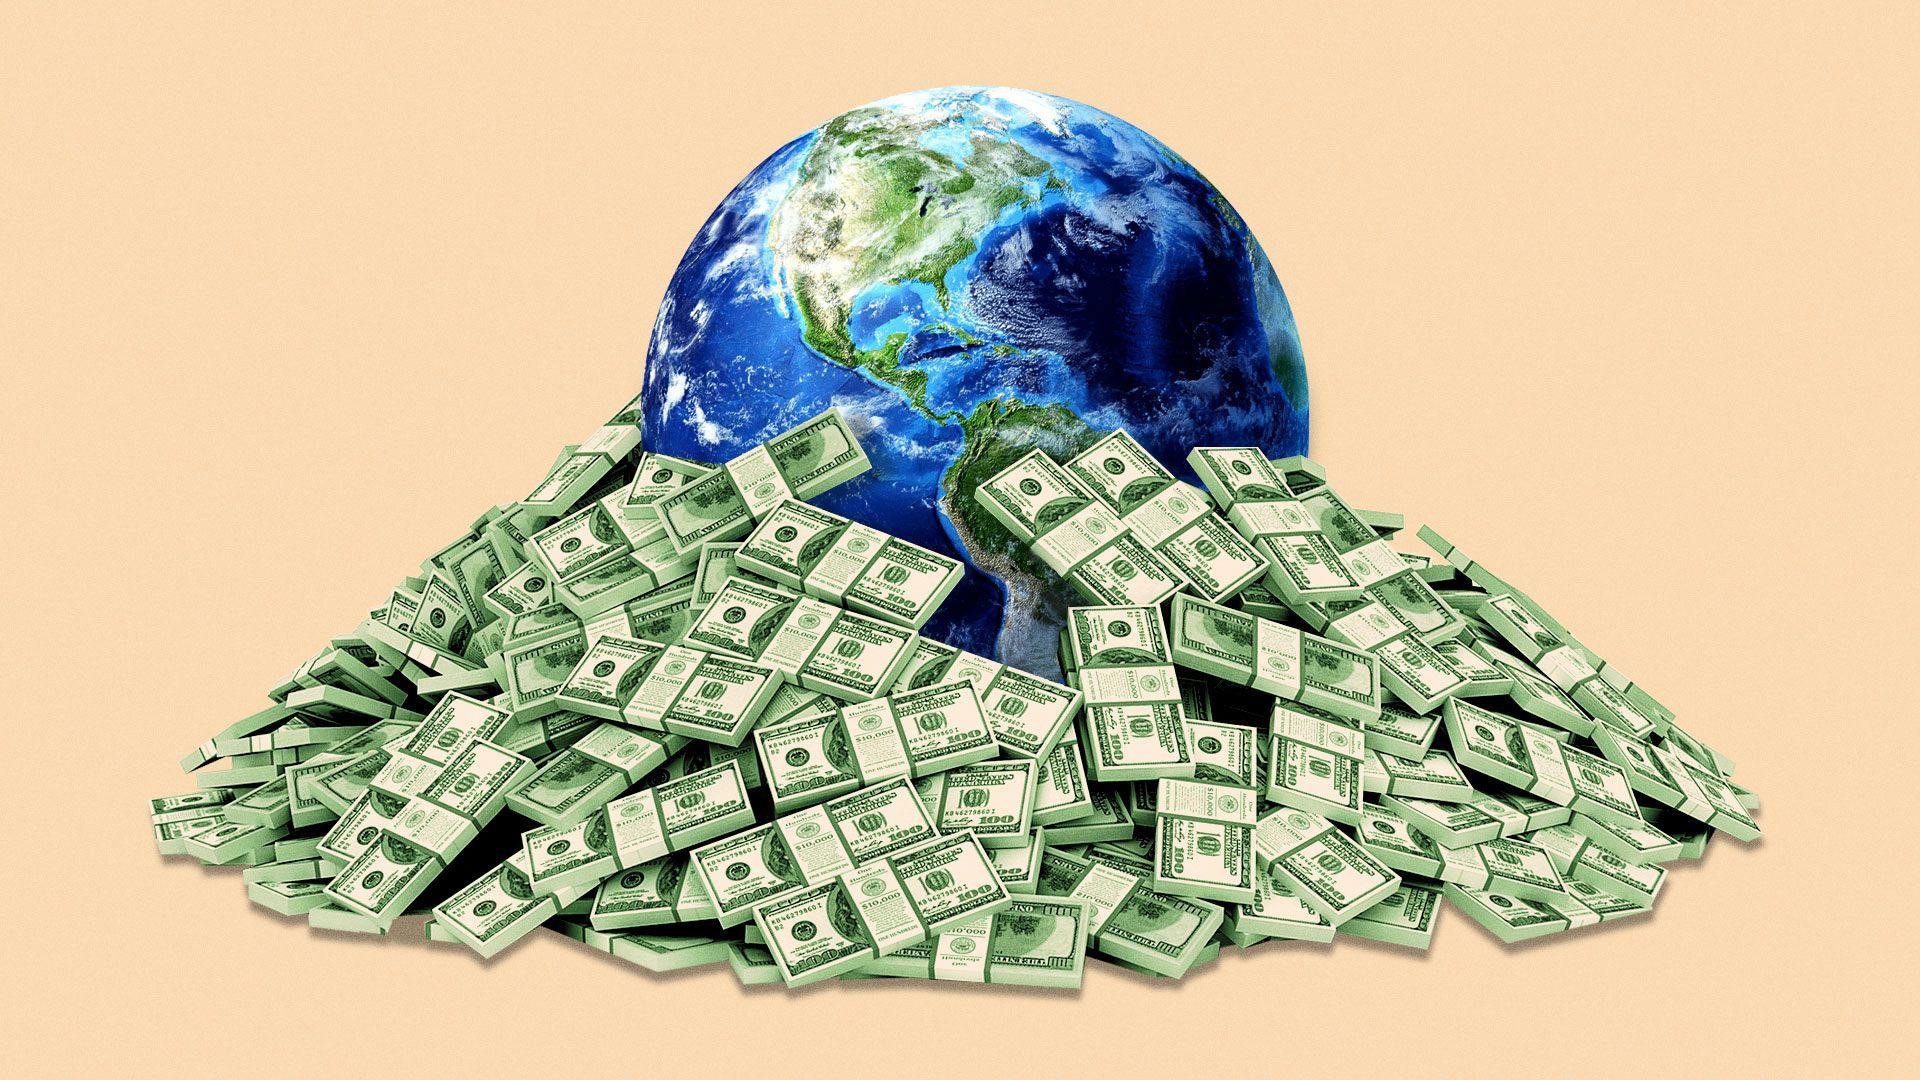 Illustration of the earth on a large pile of money